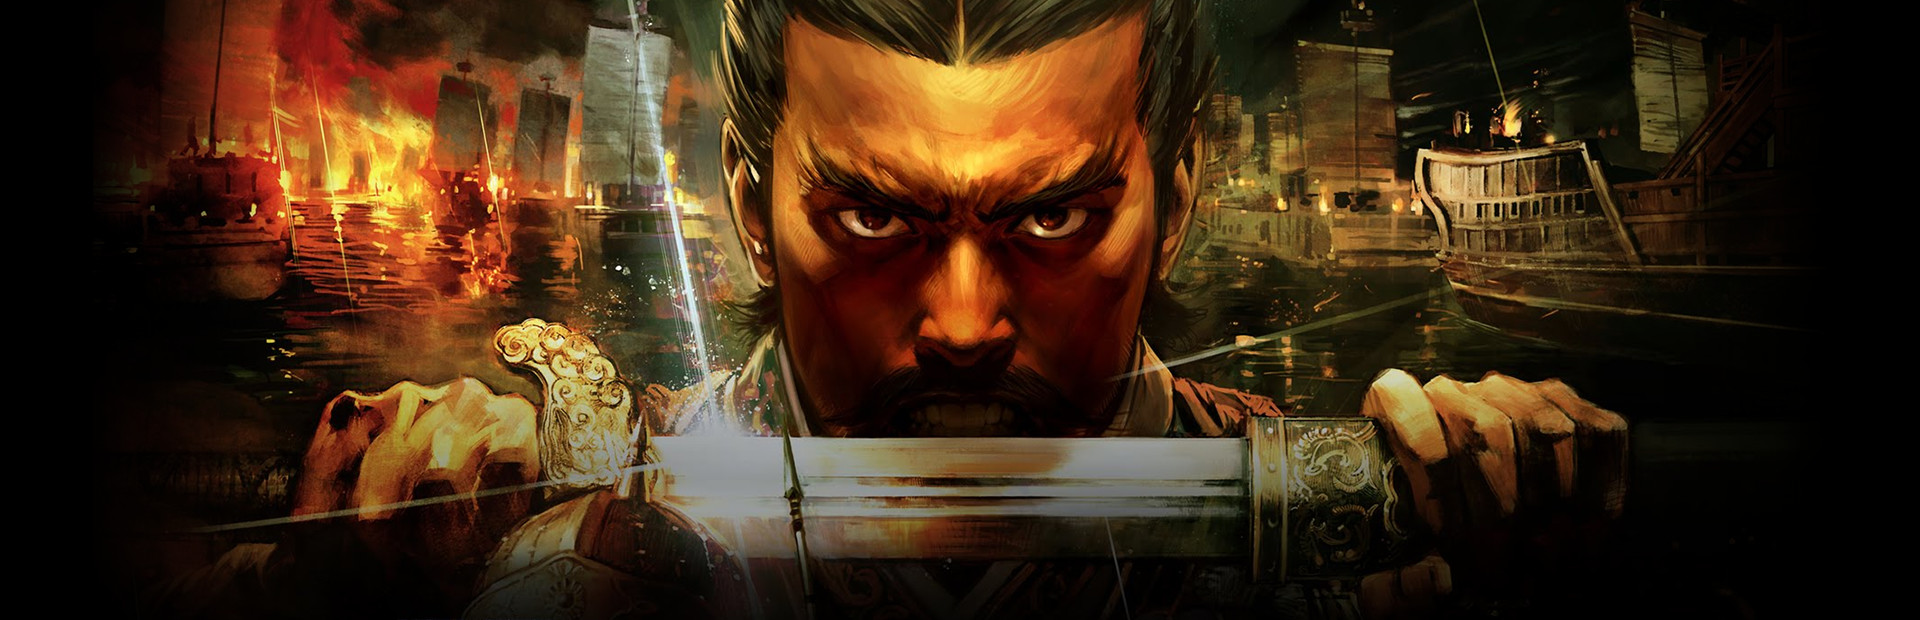 Romance of the Three Kingdoms XIII cover image